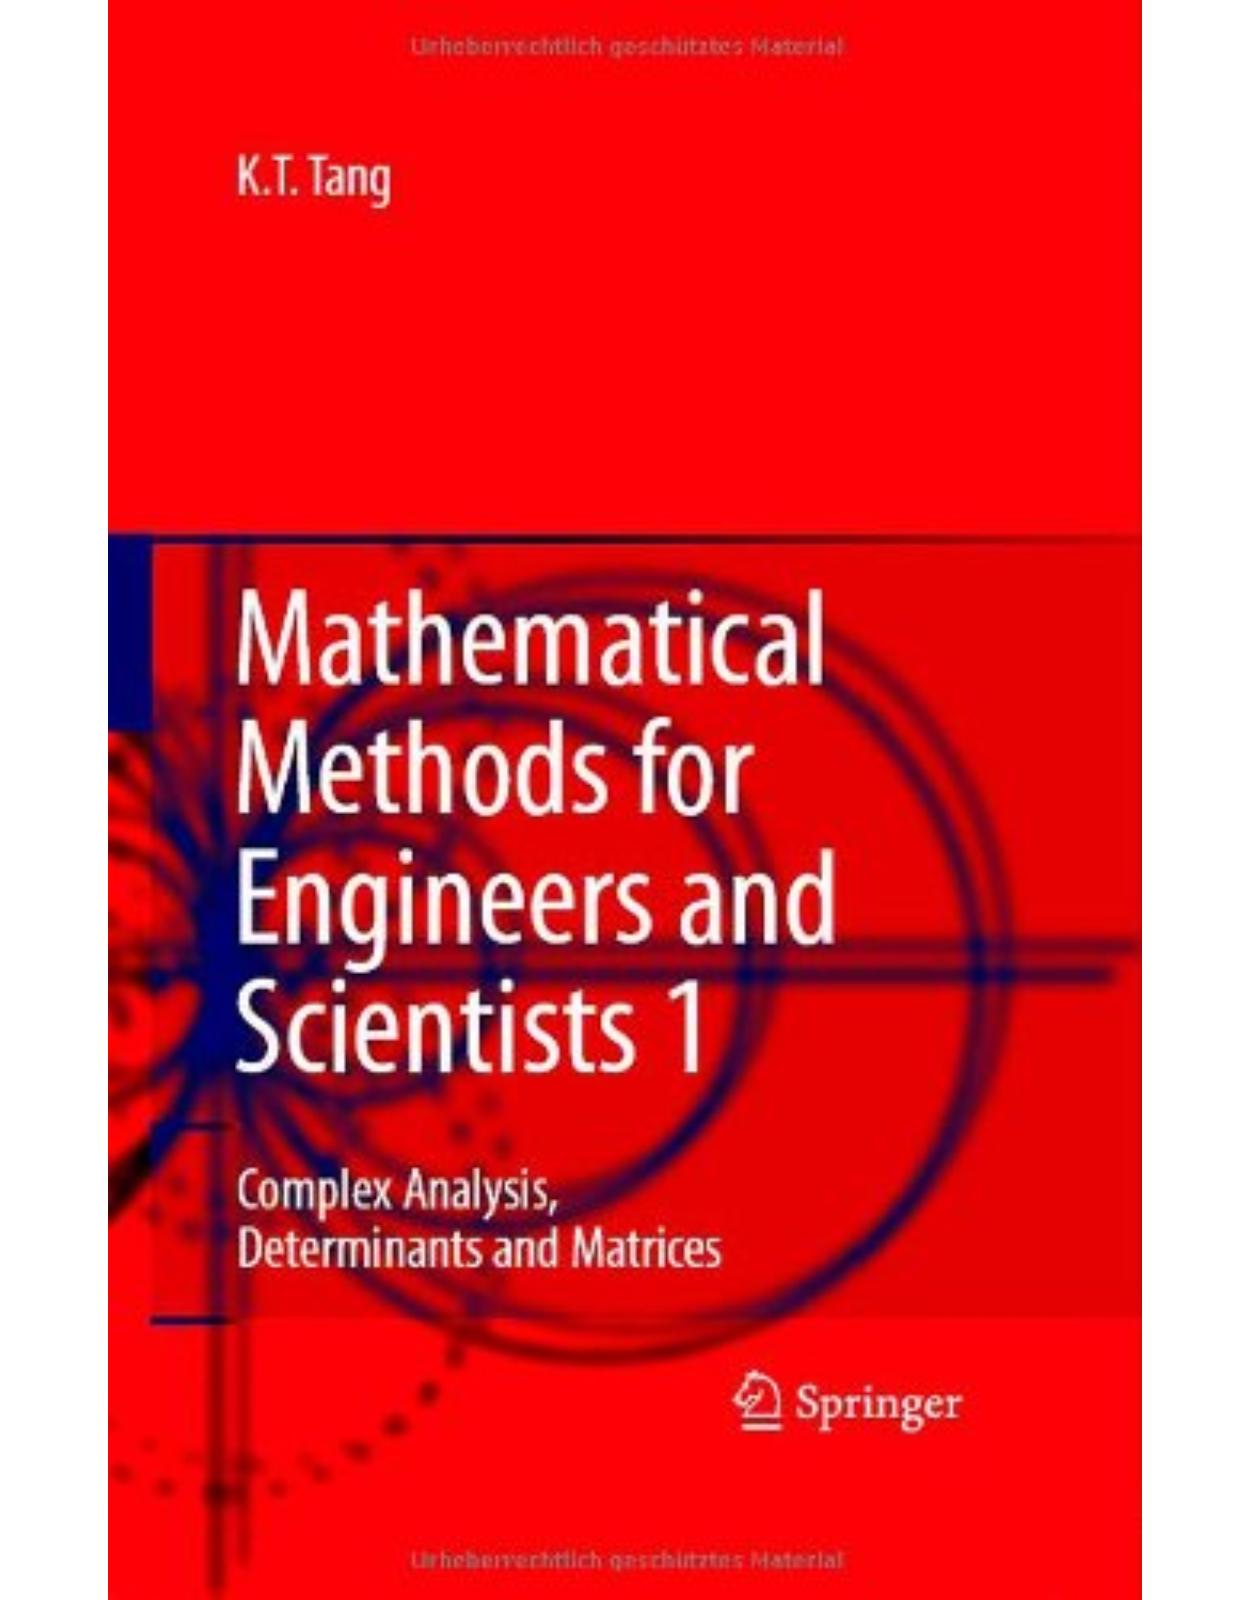 Mathematical Methods for Engineers and Scientists 1: Complex Analysis, Determinants and Matrices (v. 1)